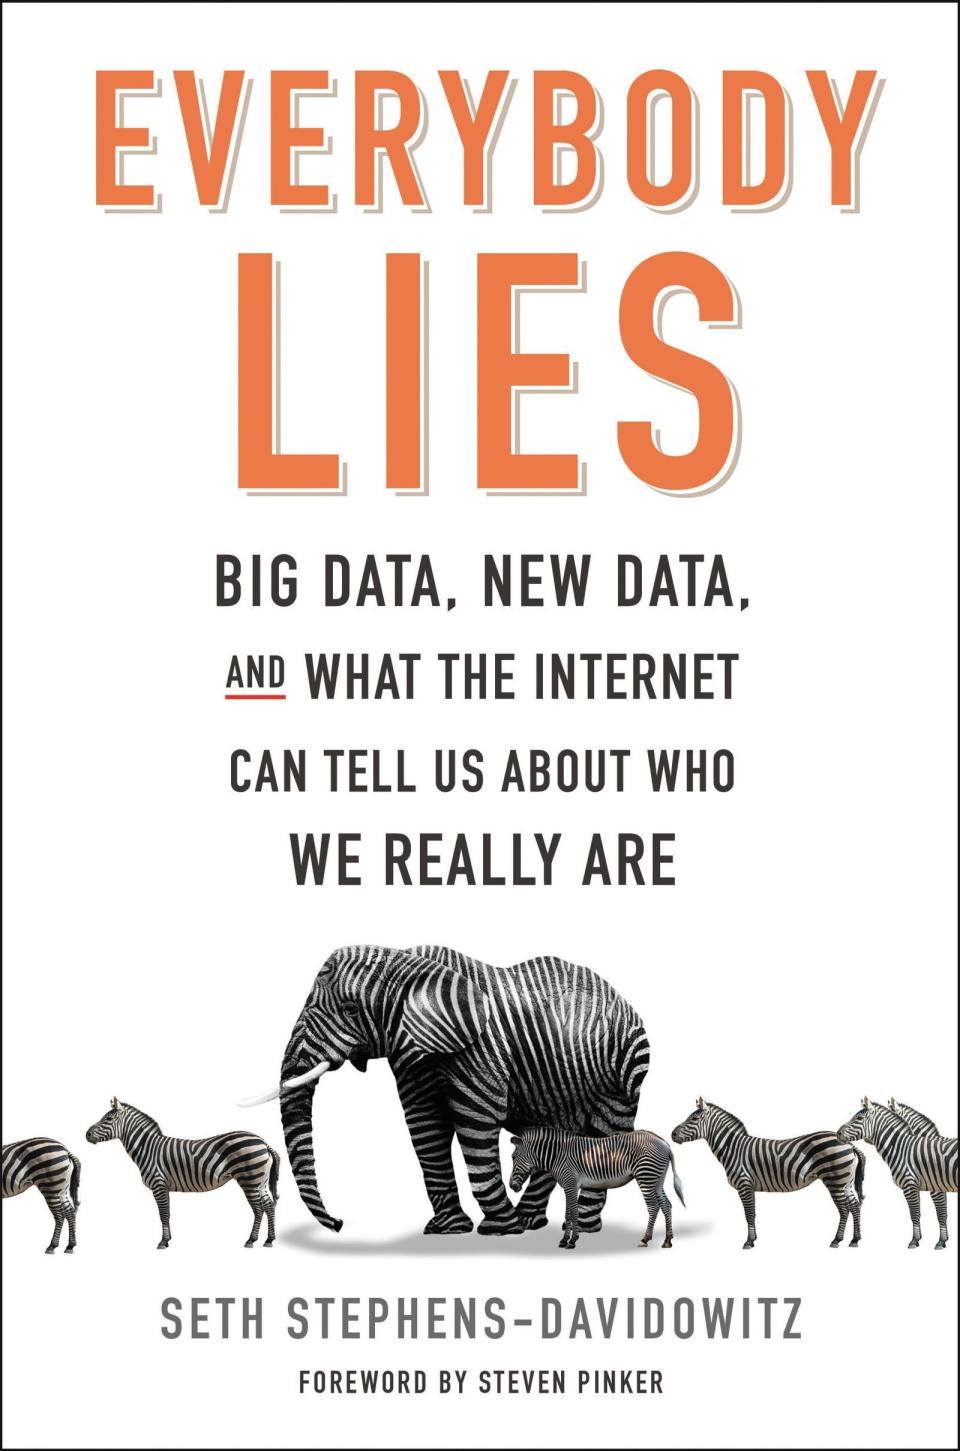 "The world is changing faster than ever and our ability to understand the inner nature and of human beings is changing alongside it. <i>Everybody Lies</i> is a revolutionary text that presents a whole new way of studying the mind through Big Data, and understanding the innermost desires of human beings revealed exclusively through their activity on the internet." &ndash; James Michael Nichols, Queer Voices Deputy Editor<br /><br />Shop it <a href="https://www.amazon.com/Everybody-Lies-Internet-About-Really/dp/0062390856" target="_blank">here</a>.